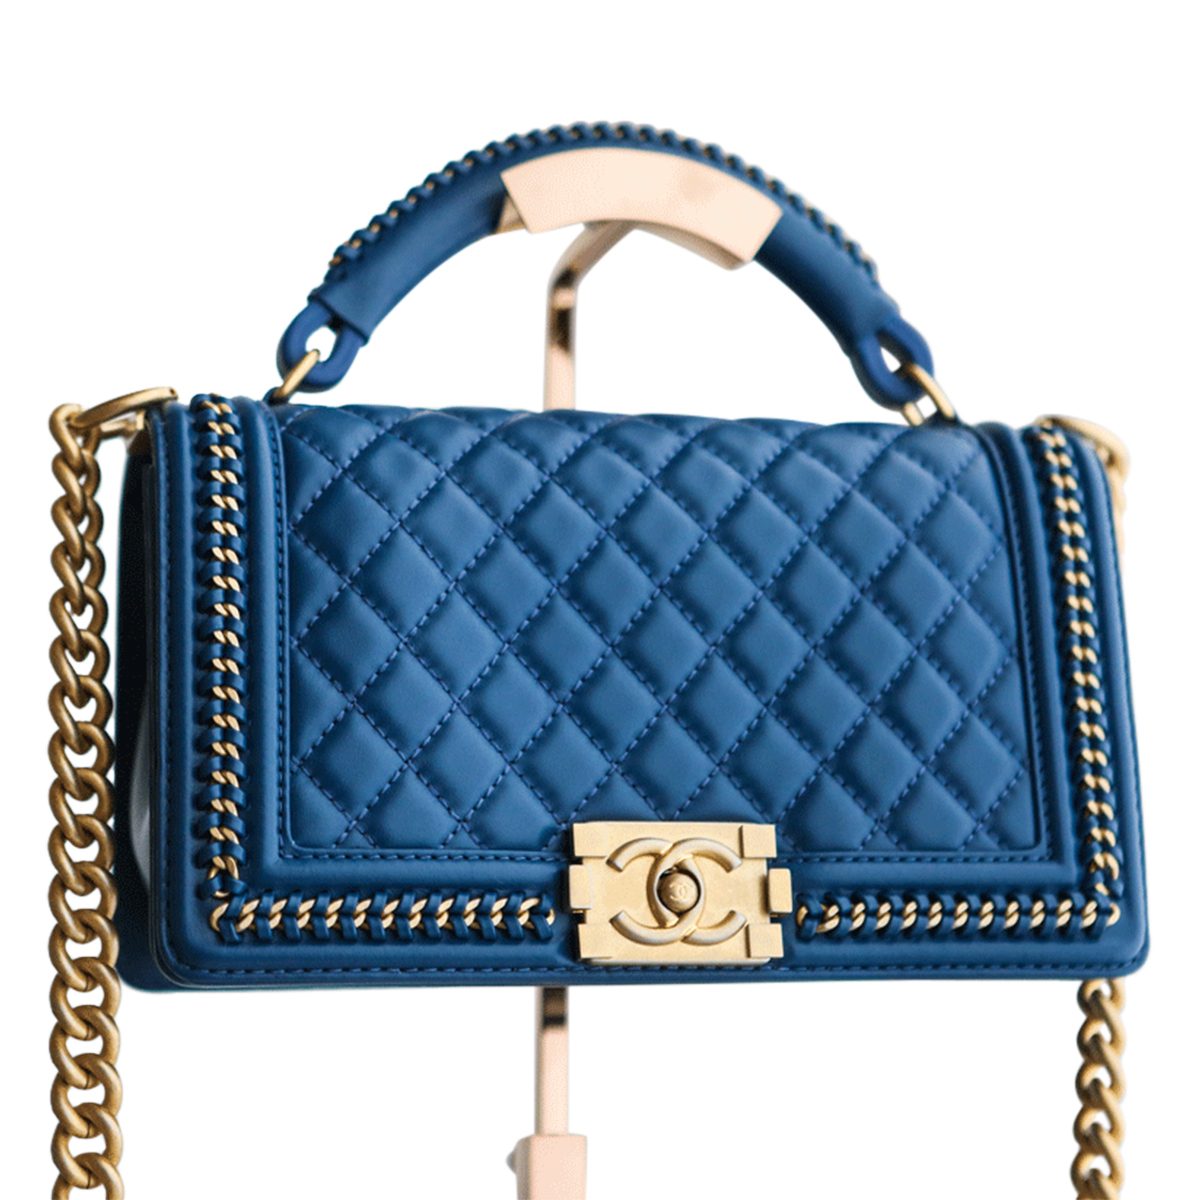 Chanel Boy Bag with Handle - Janet Mandell